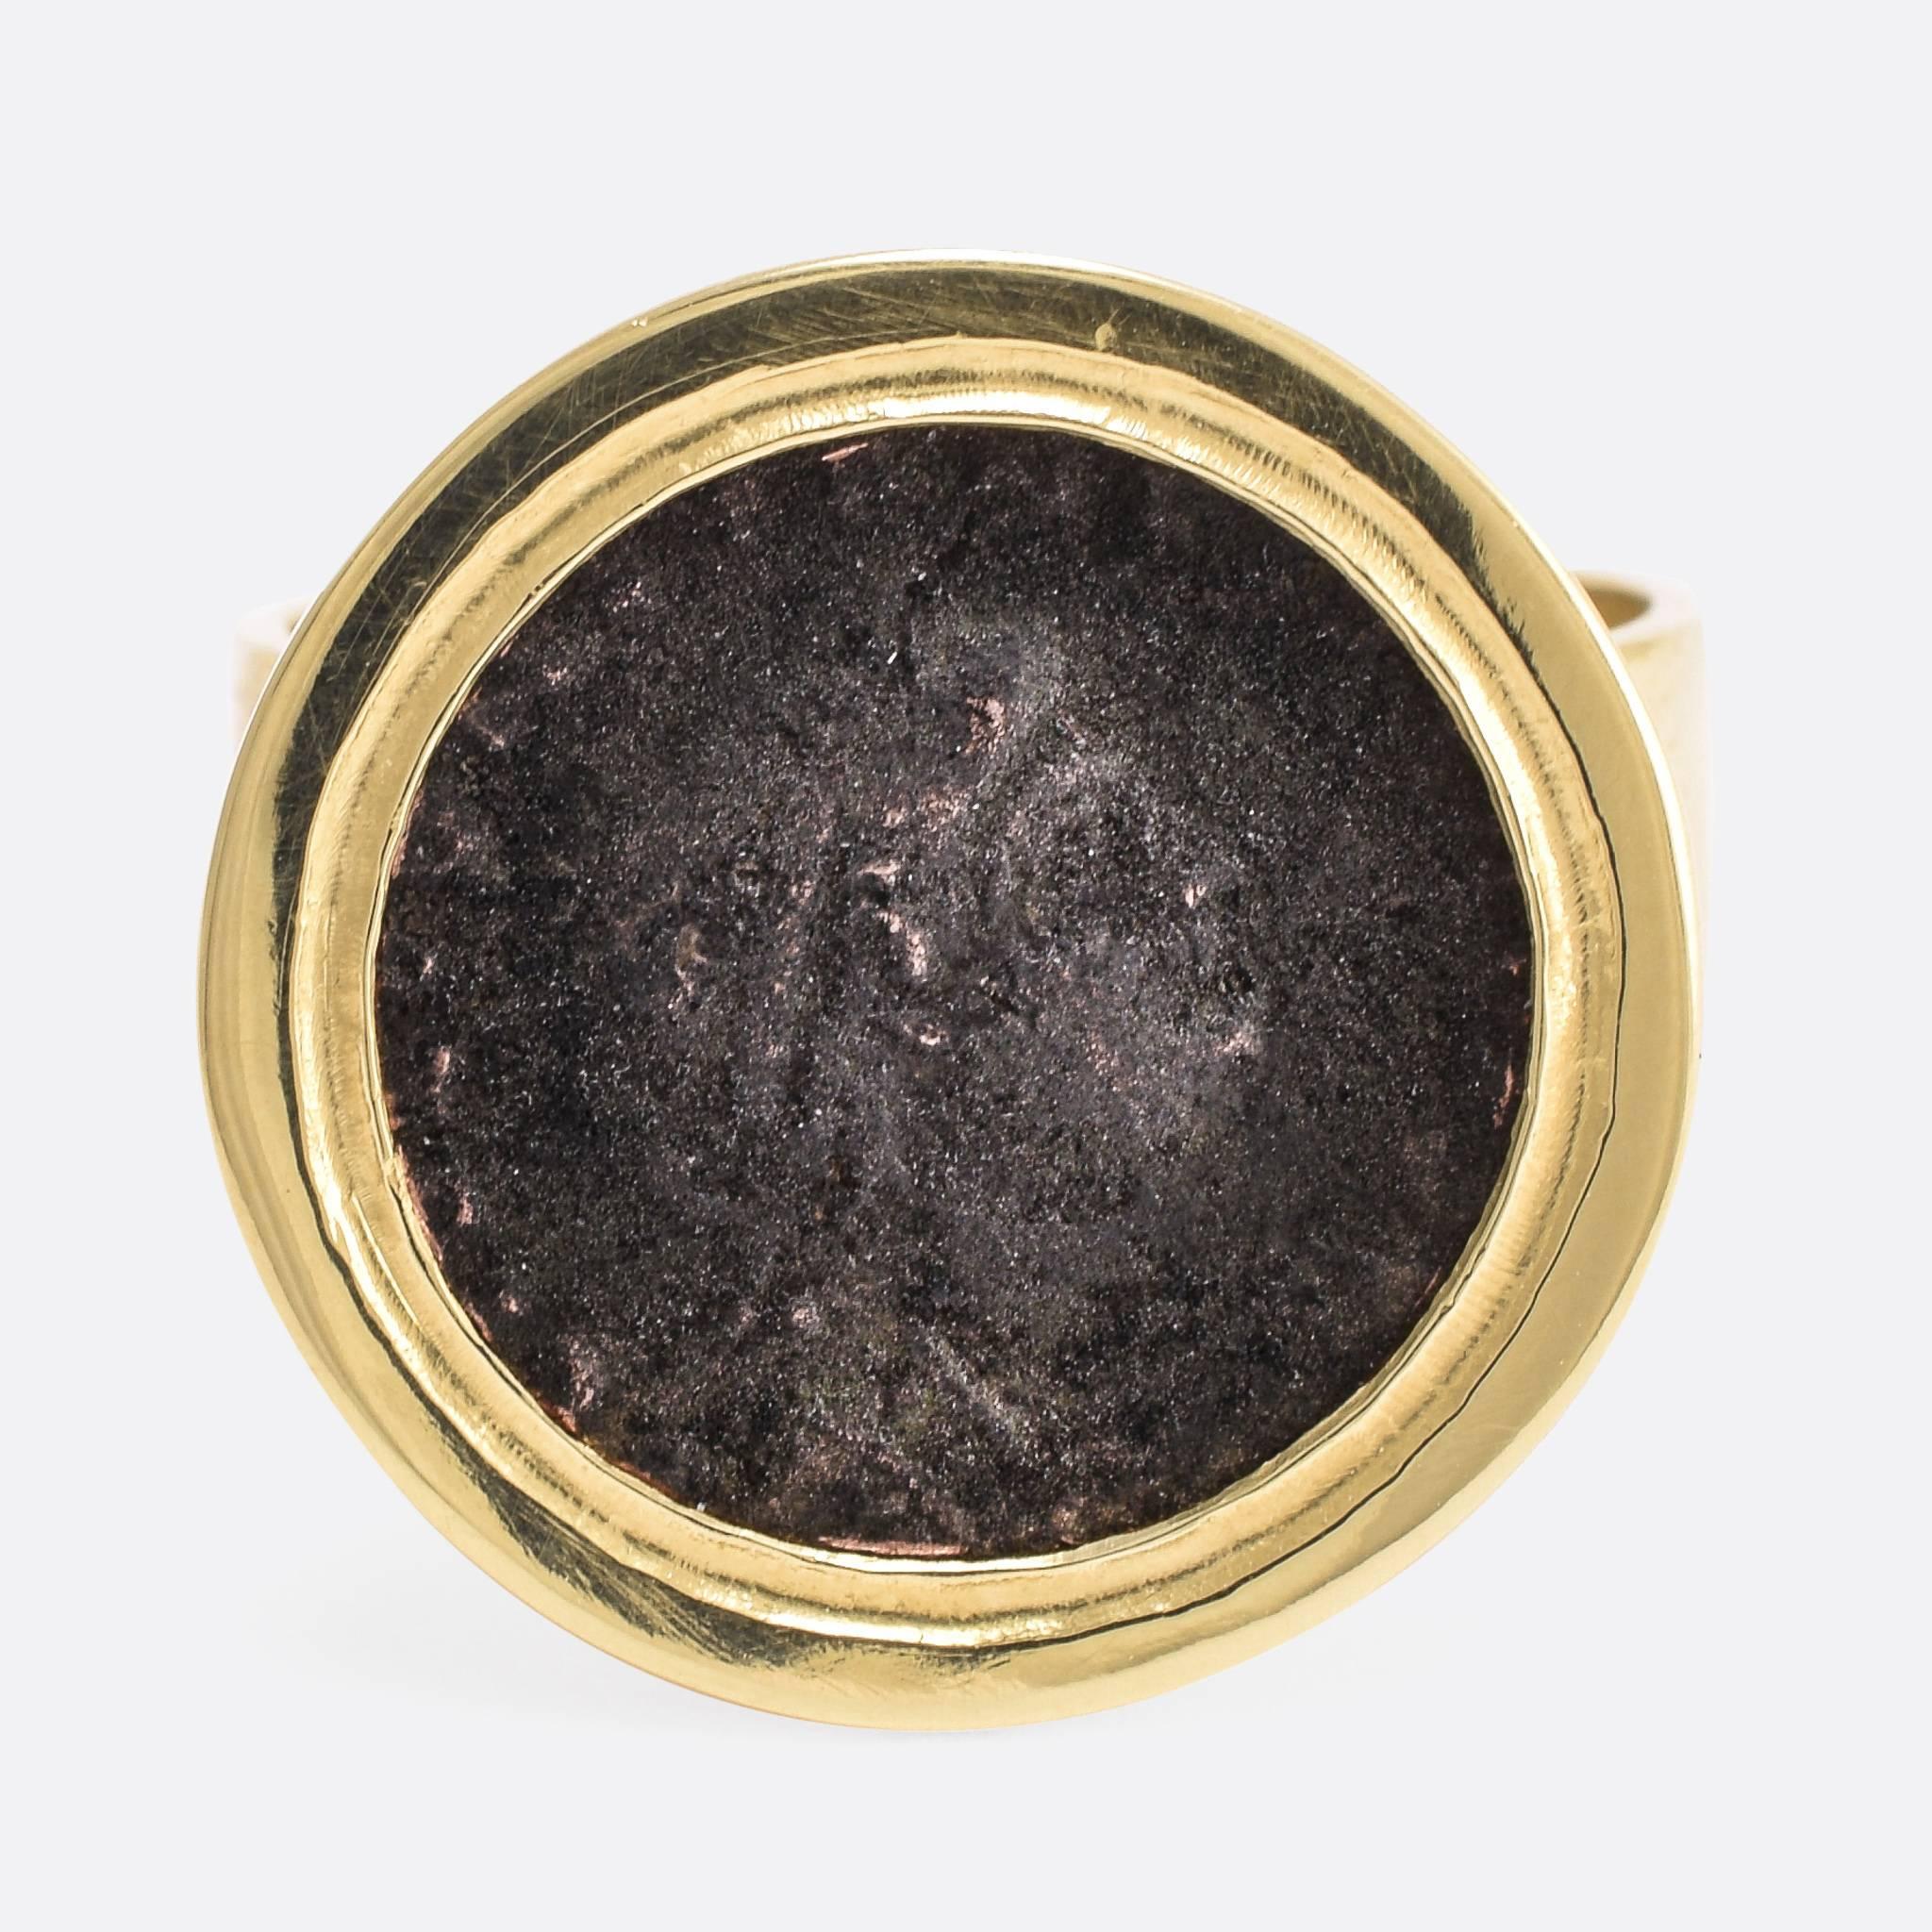 This cool Georgian signet ring has been set with an ancient Roman coin. The ring mount is modelled in 18k yellow gold, finely worked with an open back to display the reverse of the coin as well as the head side. The coin is a bronze Siliqua, with a